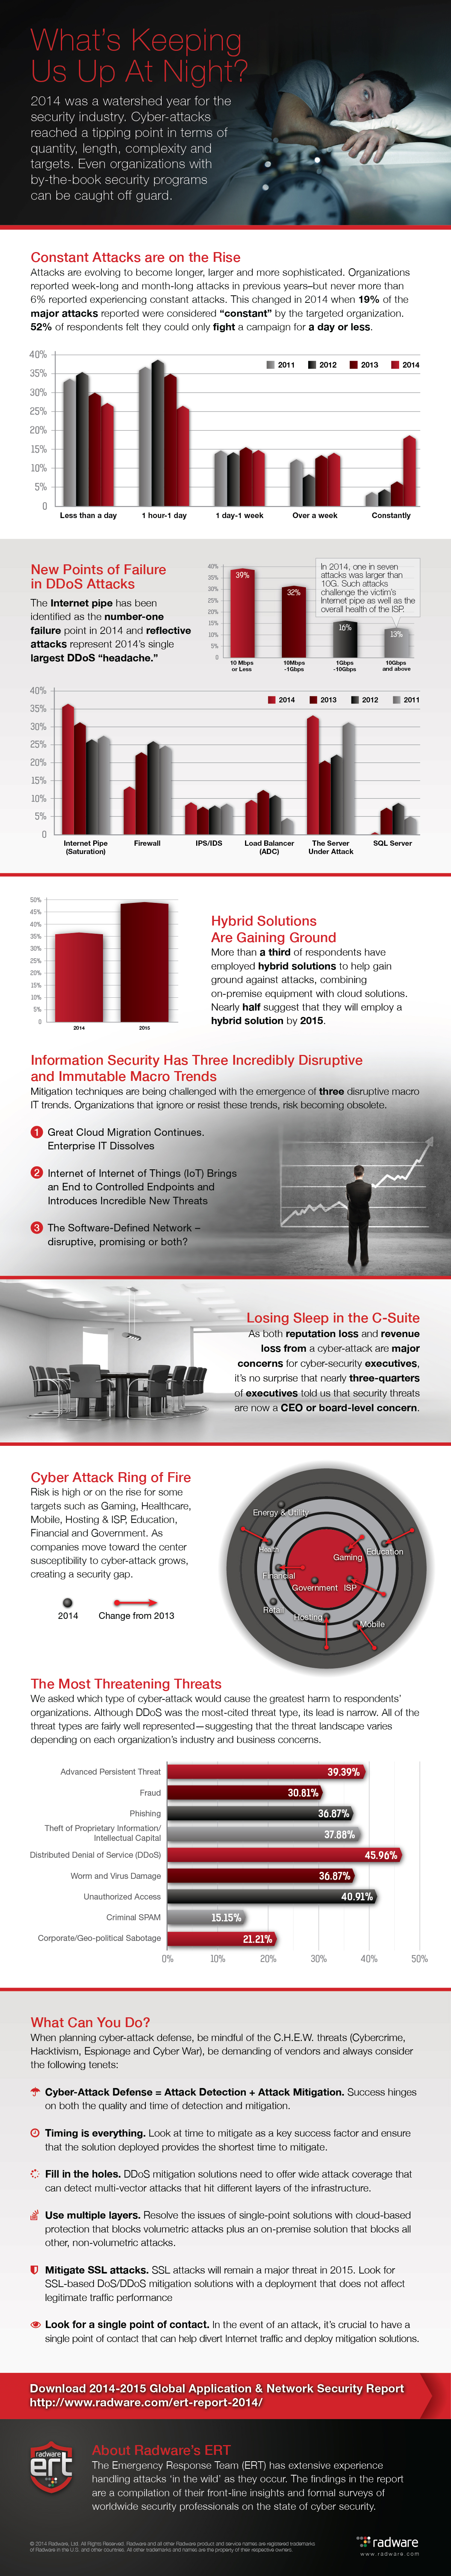 2014 - 2015 Global Application & Network Security Infographic